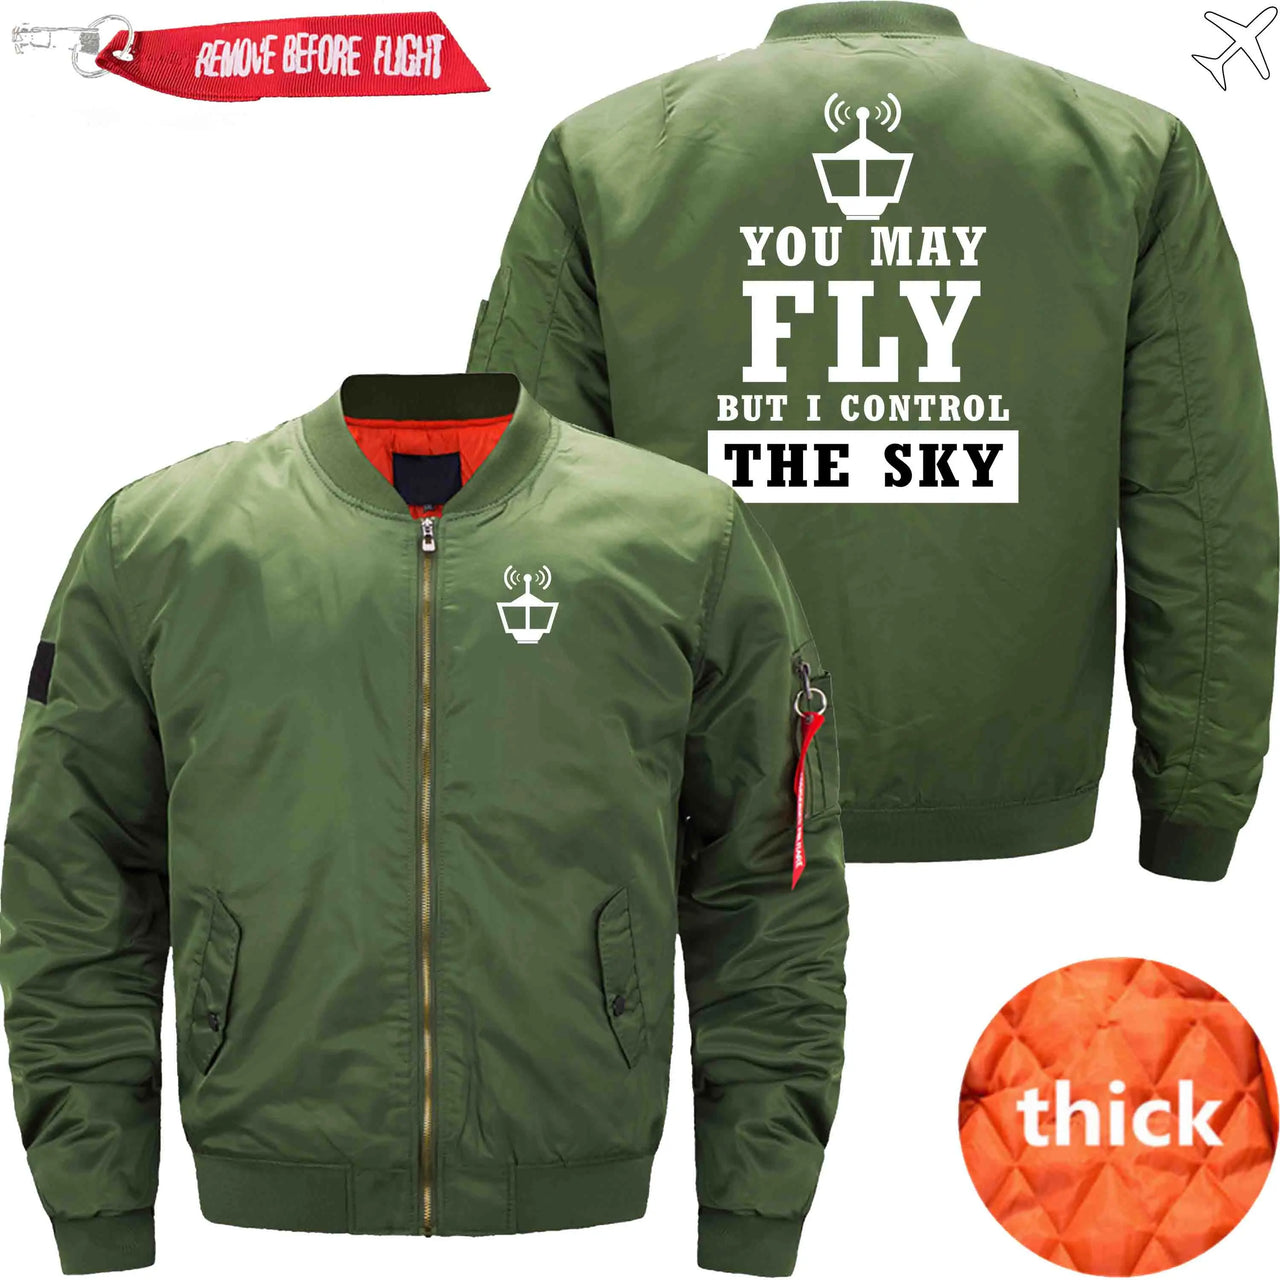 YOU MAY FLY BUT I CONTROL THE SKY - JACKET THE AV8R